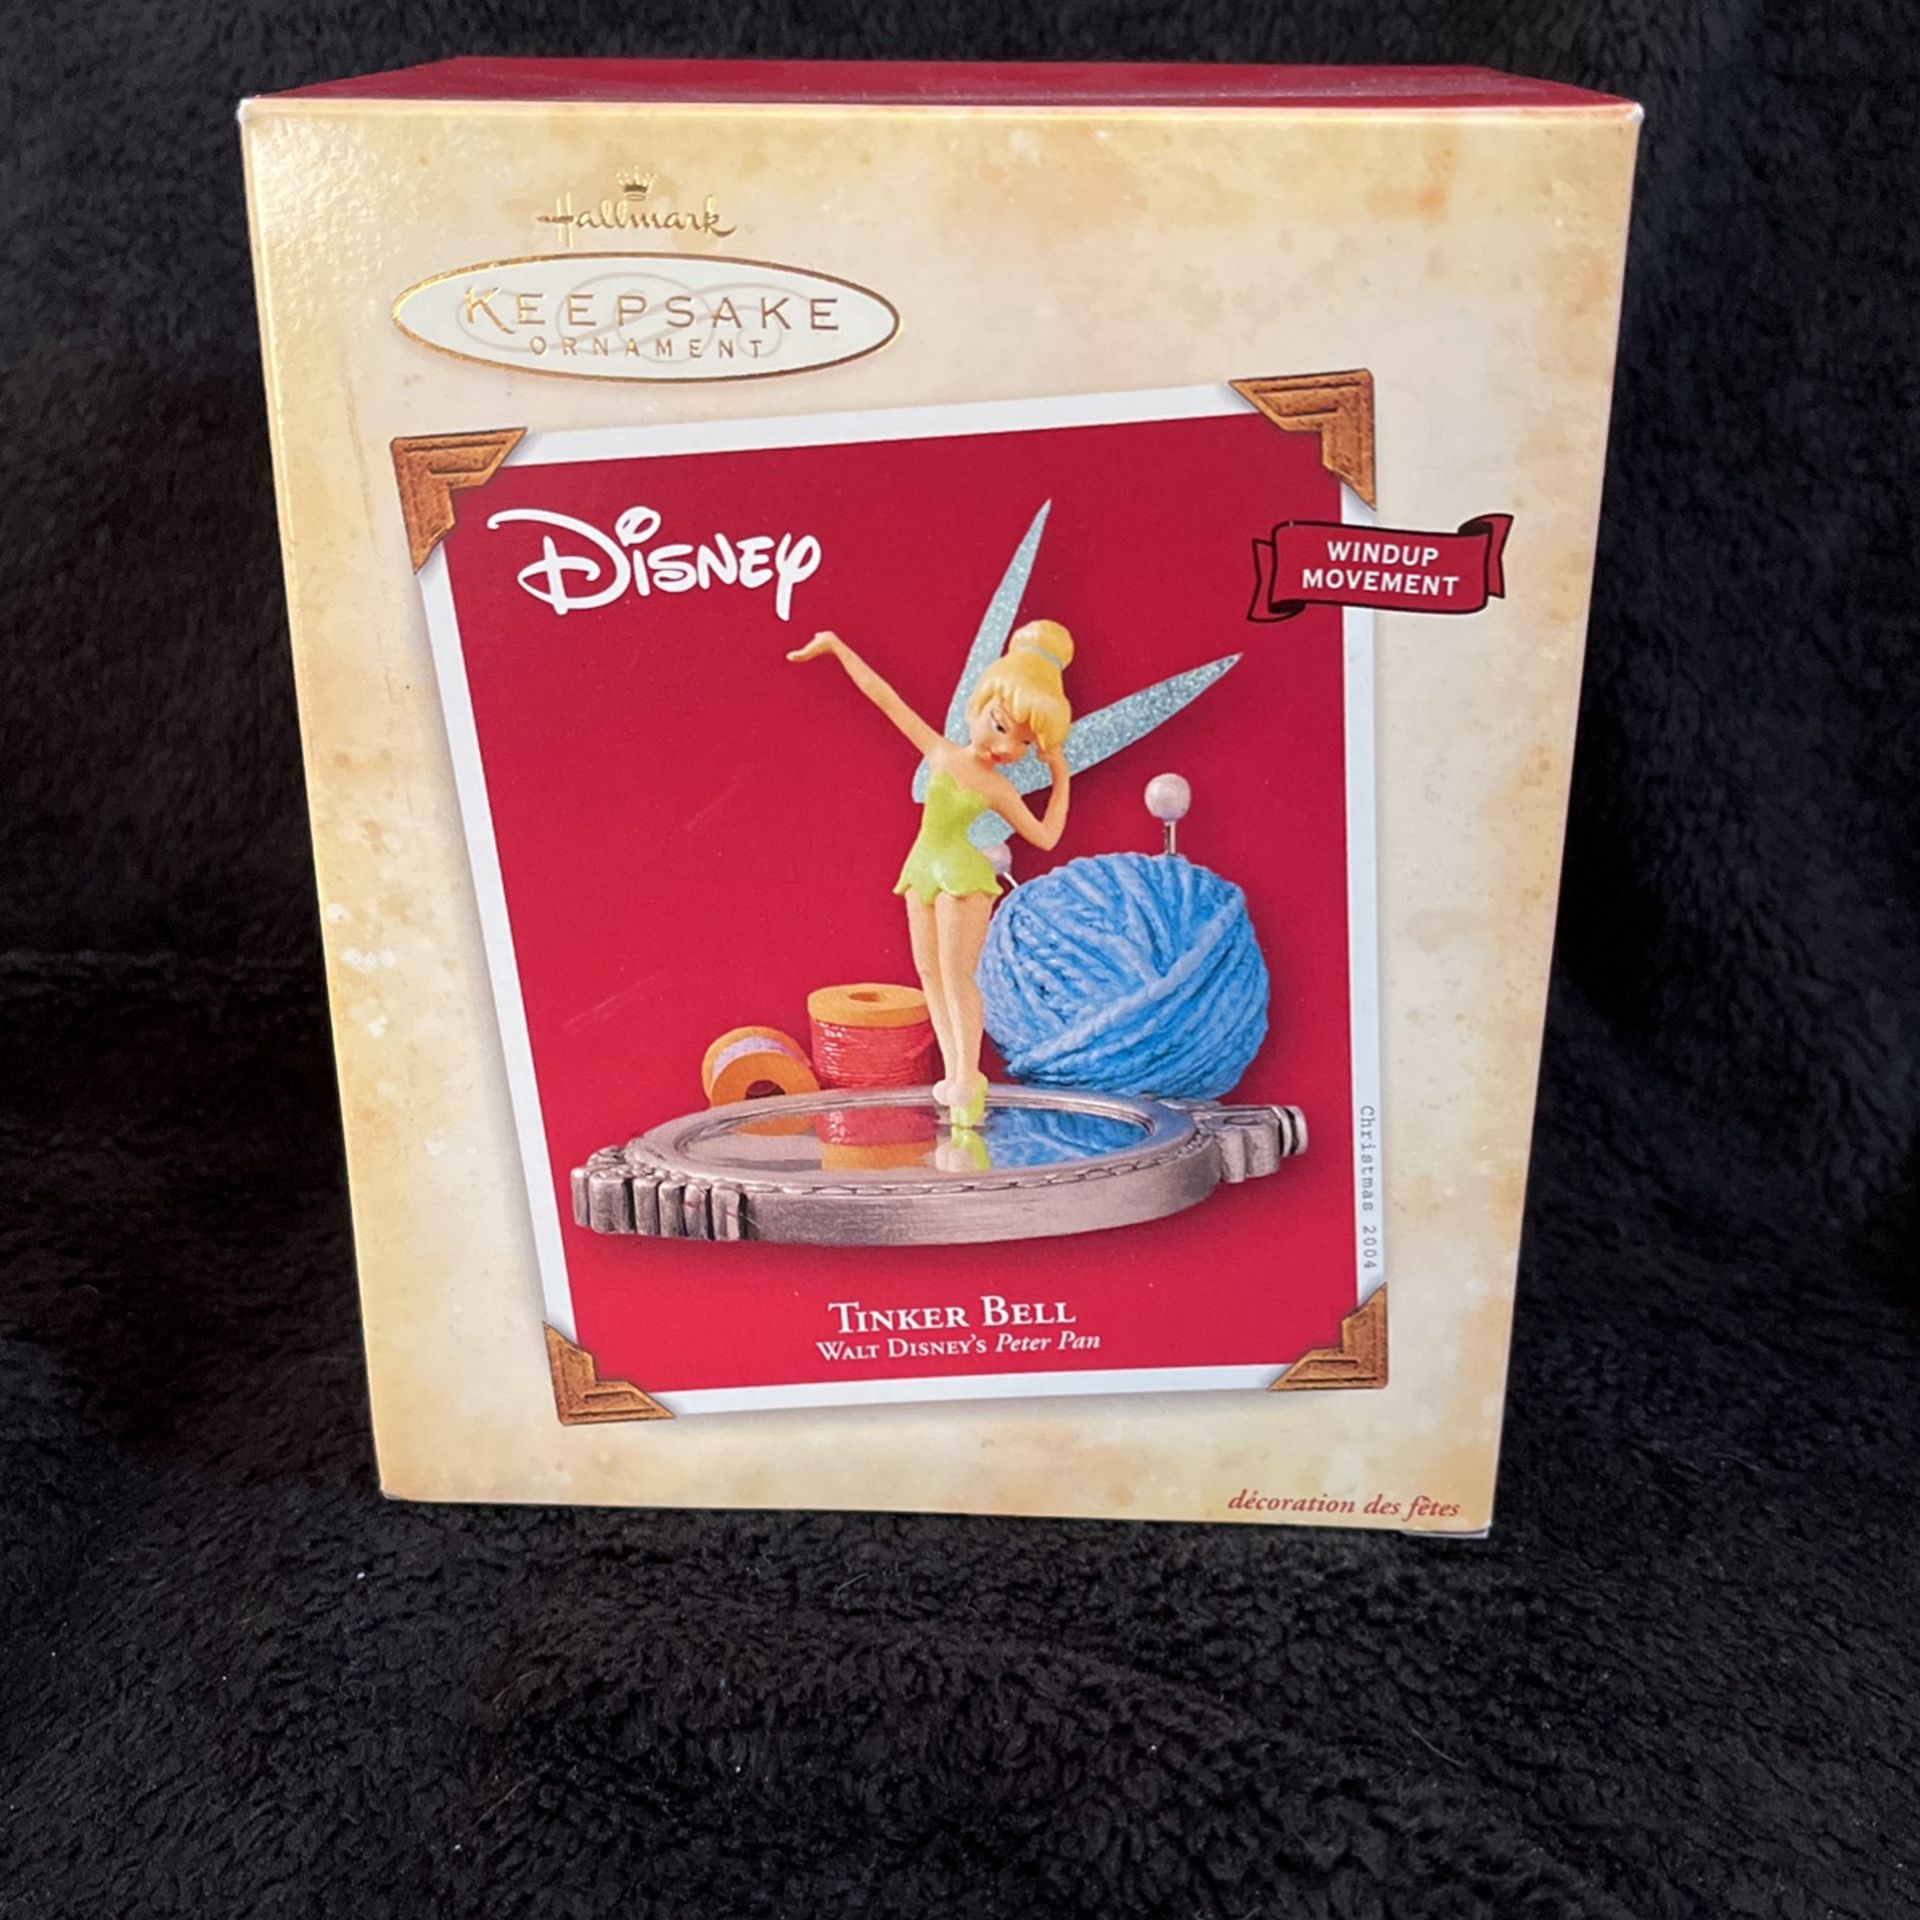 Disney TINKER BELL windup movement Ornament - Lots More Disney Ornaments In Profile ! 